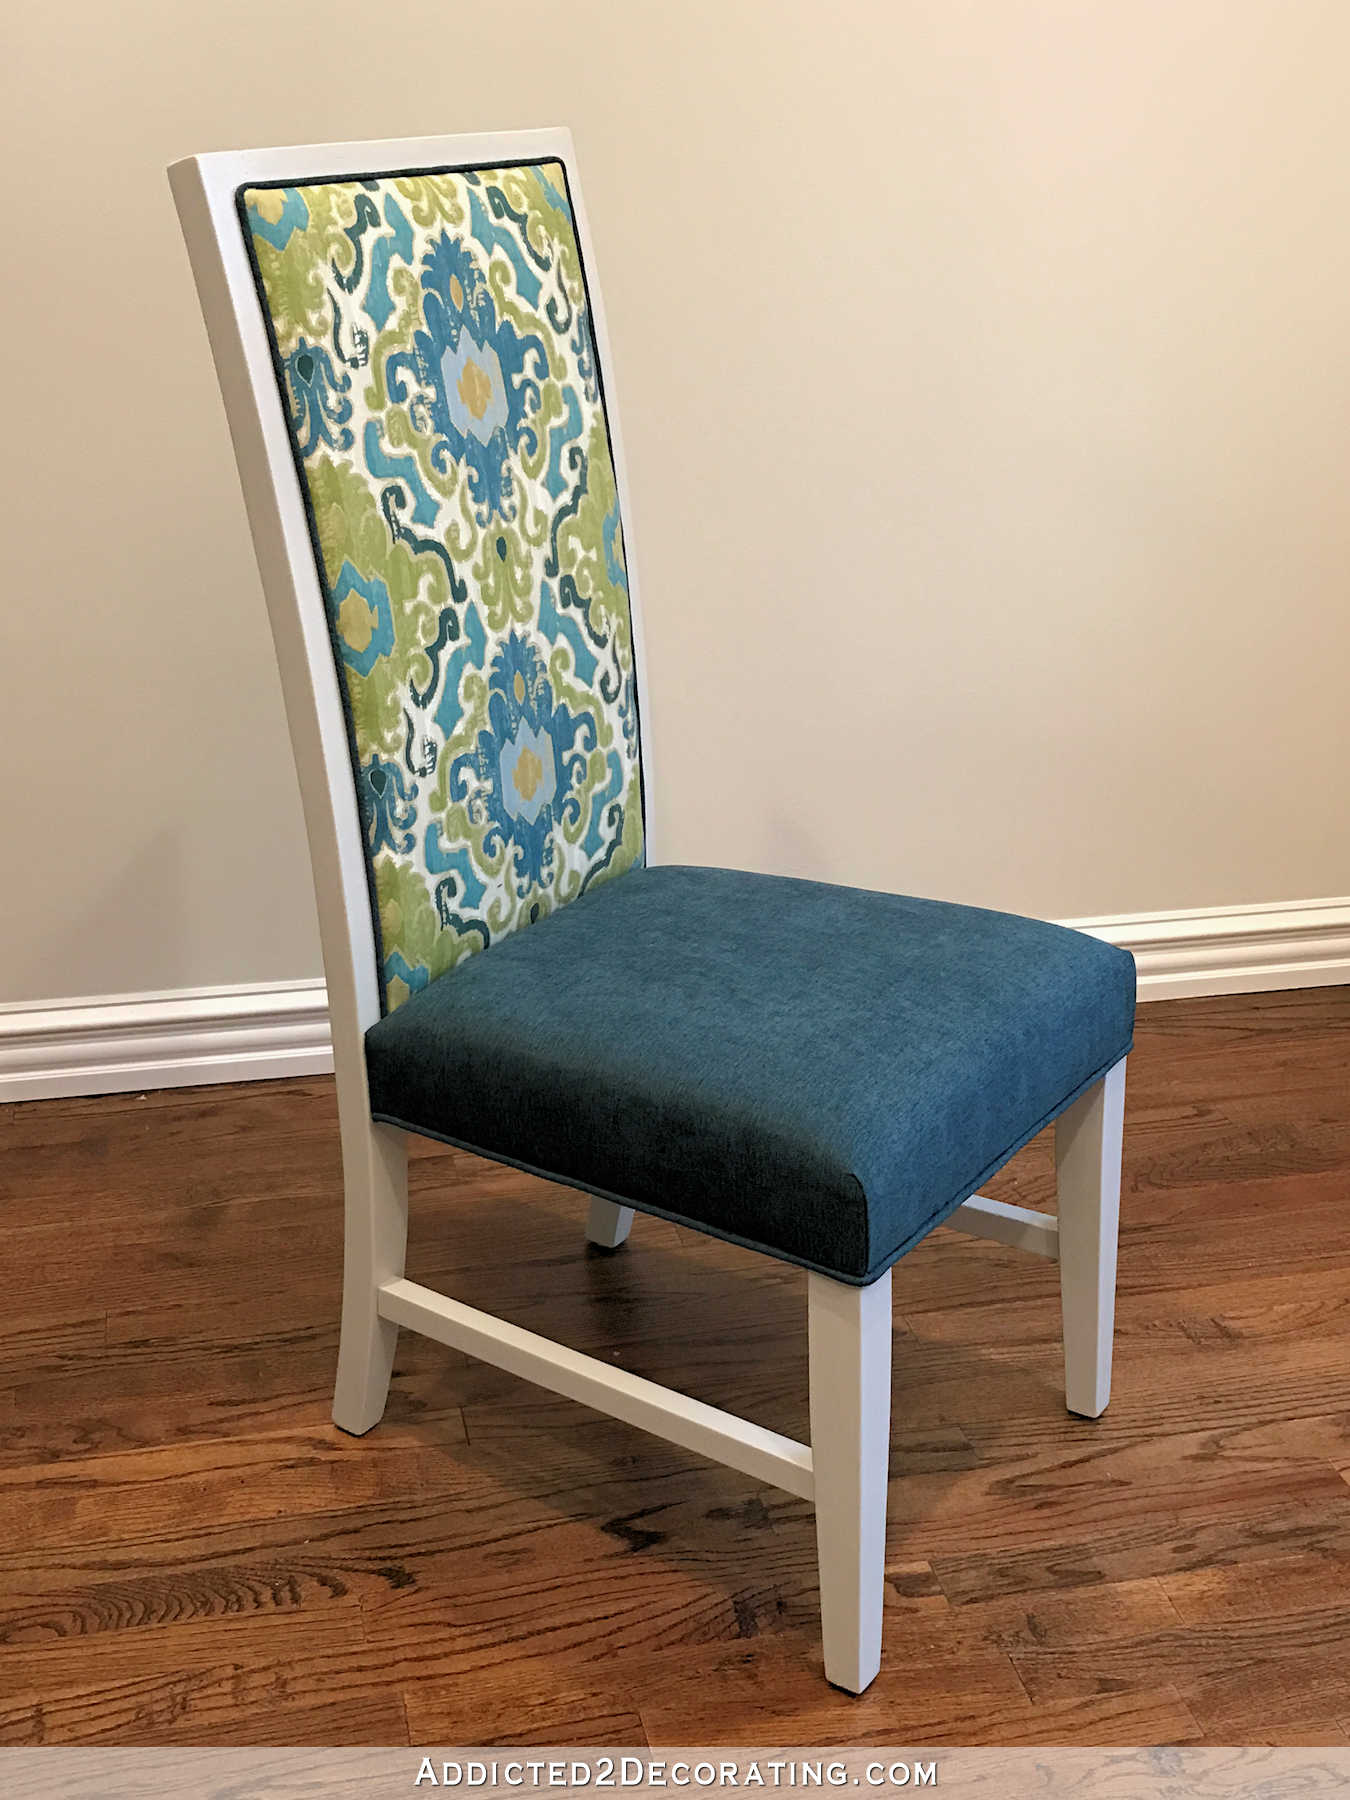 Breakfast Room Dining Chair Makeover – From Neutral To Colorful